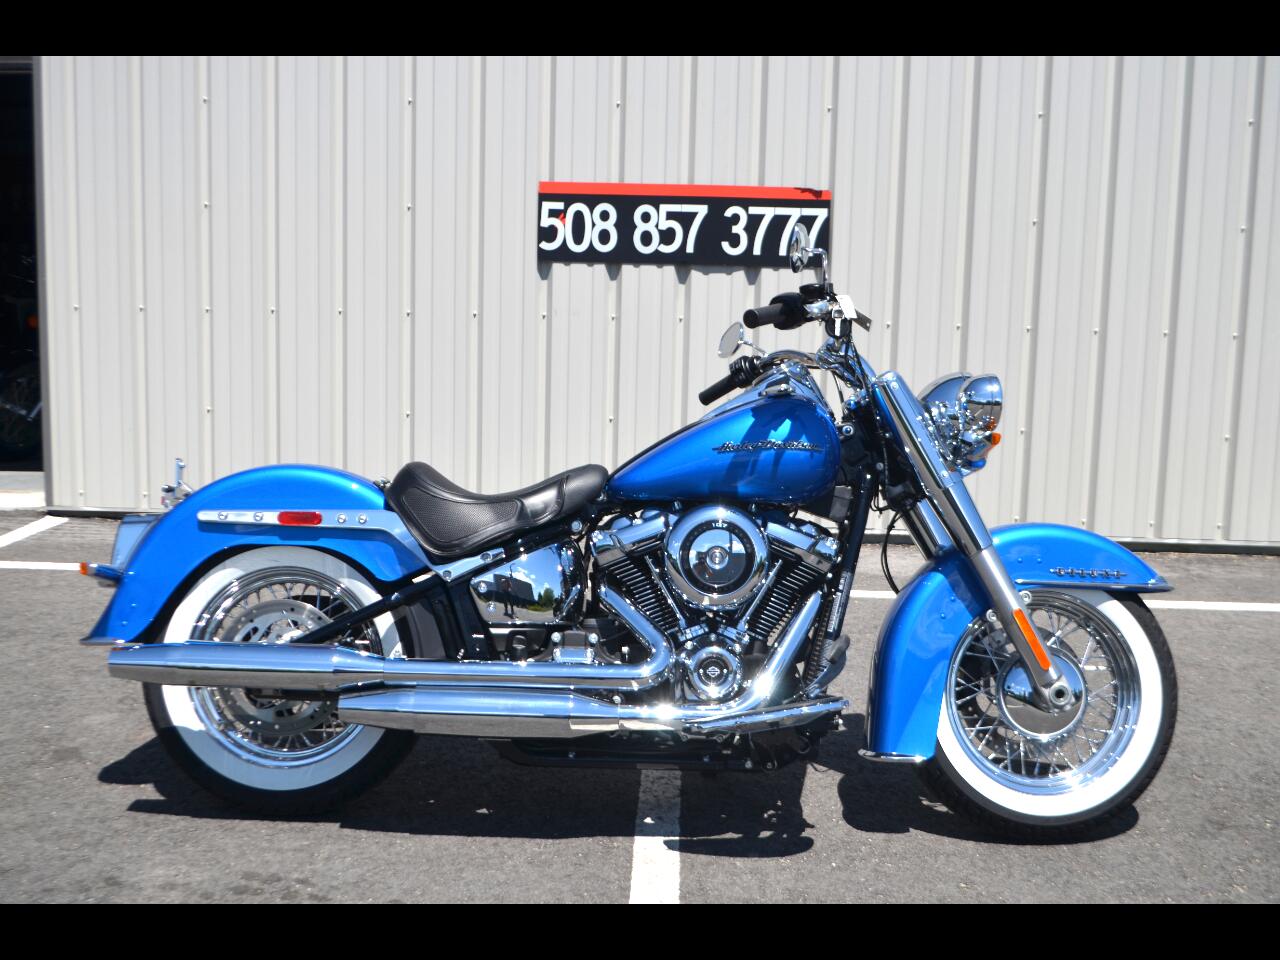 Used 2018 Harley Davidson Softail Deluxe Flde For Sale In Plymouth Ma 02360 Motorcycles 508